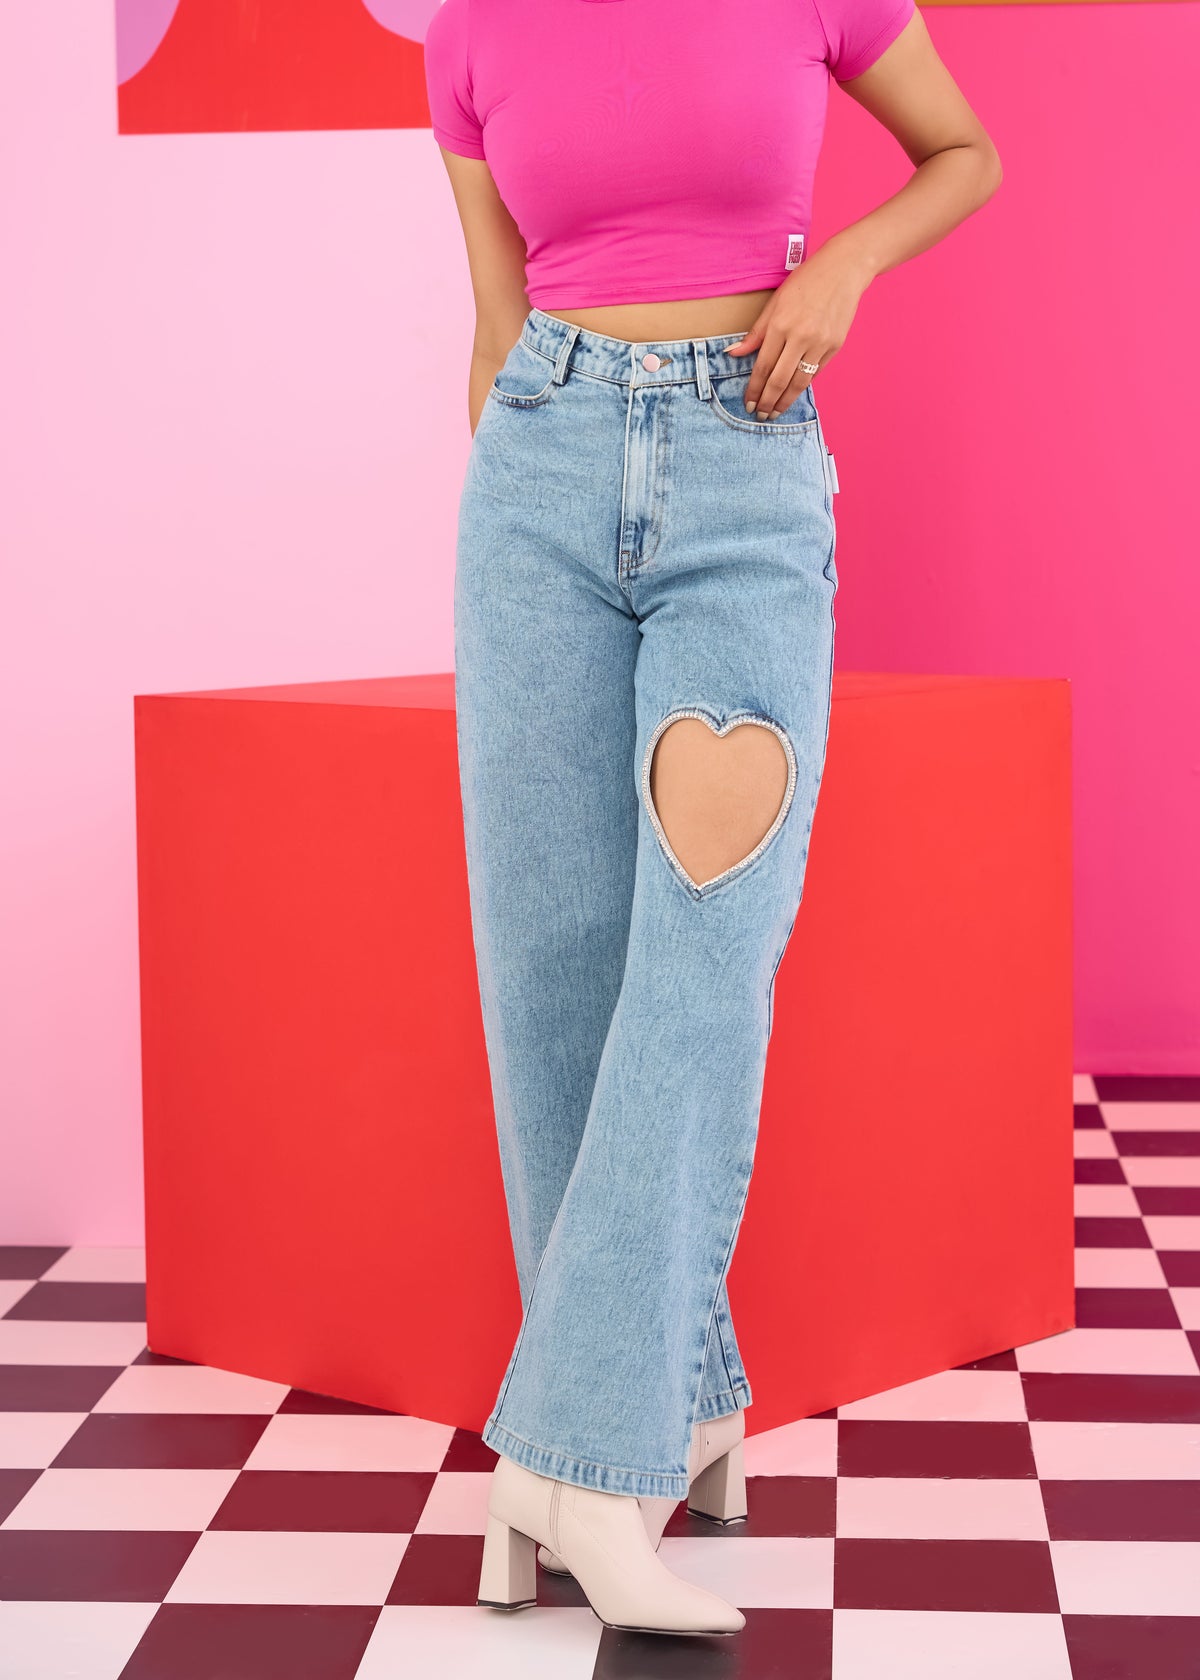 Emily in Paris: Heart Cutout Embellished Jeans